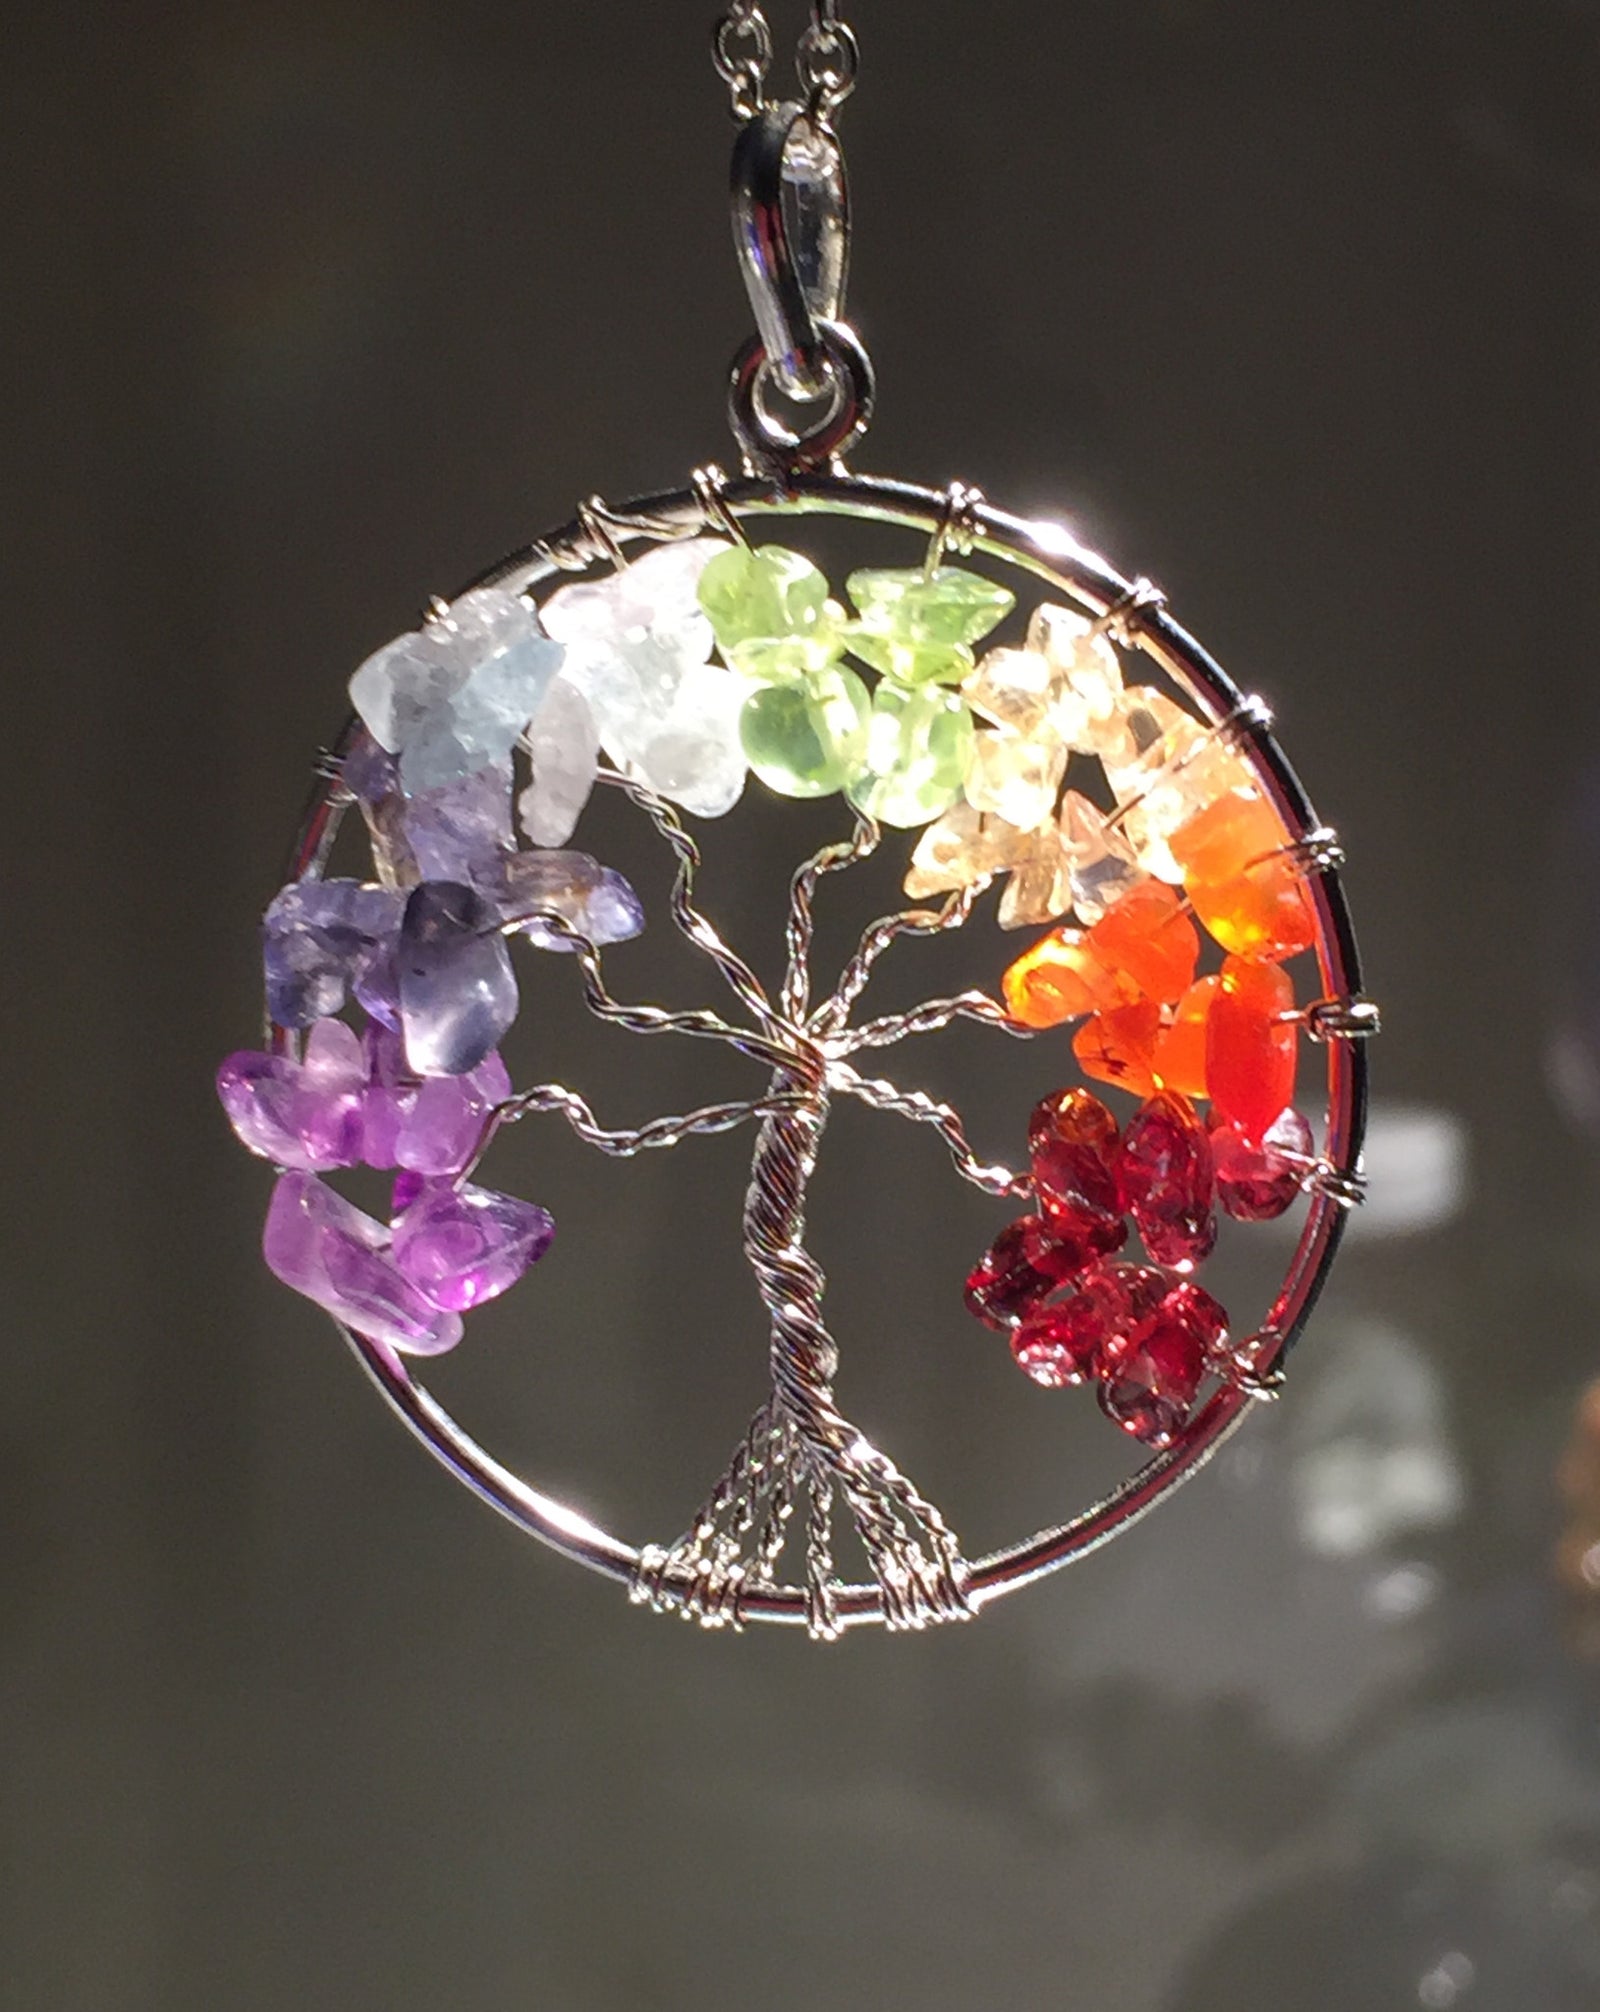 Irish Tree of Life Necklace - Sterling Silver 925 by Magpie Gems